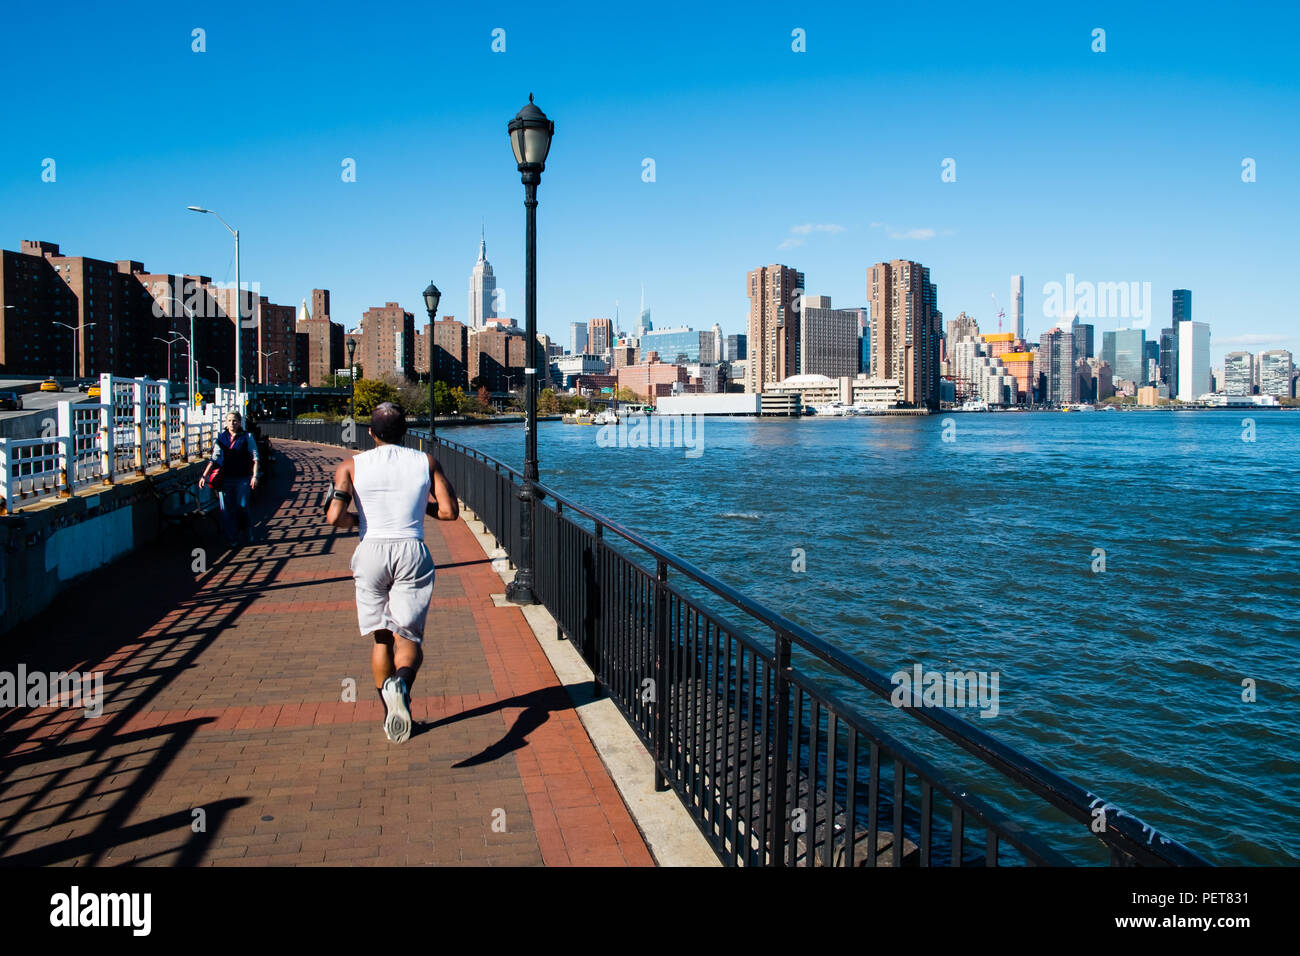 A man jogging by the river, East River, New York Stock Photo